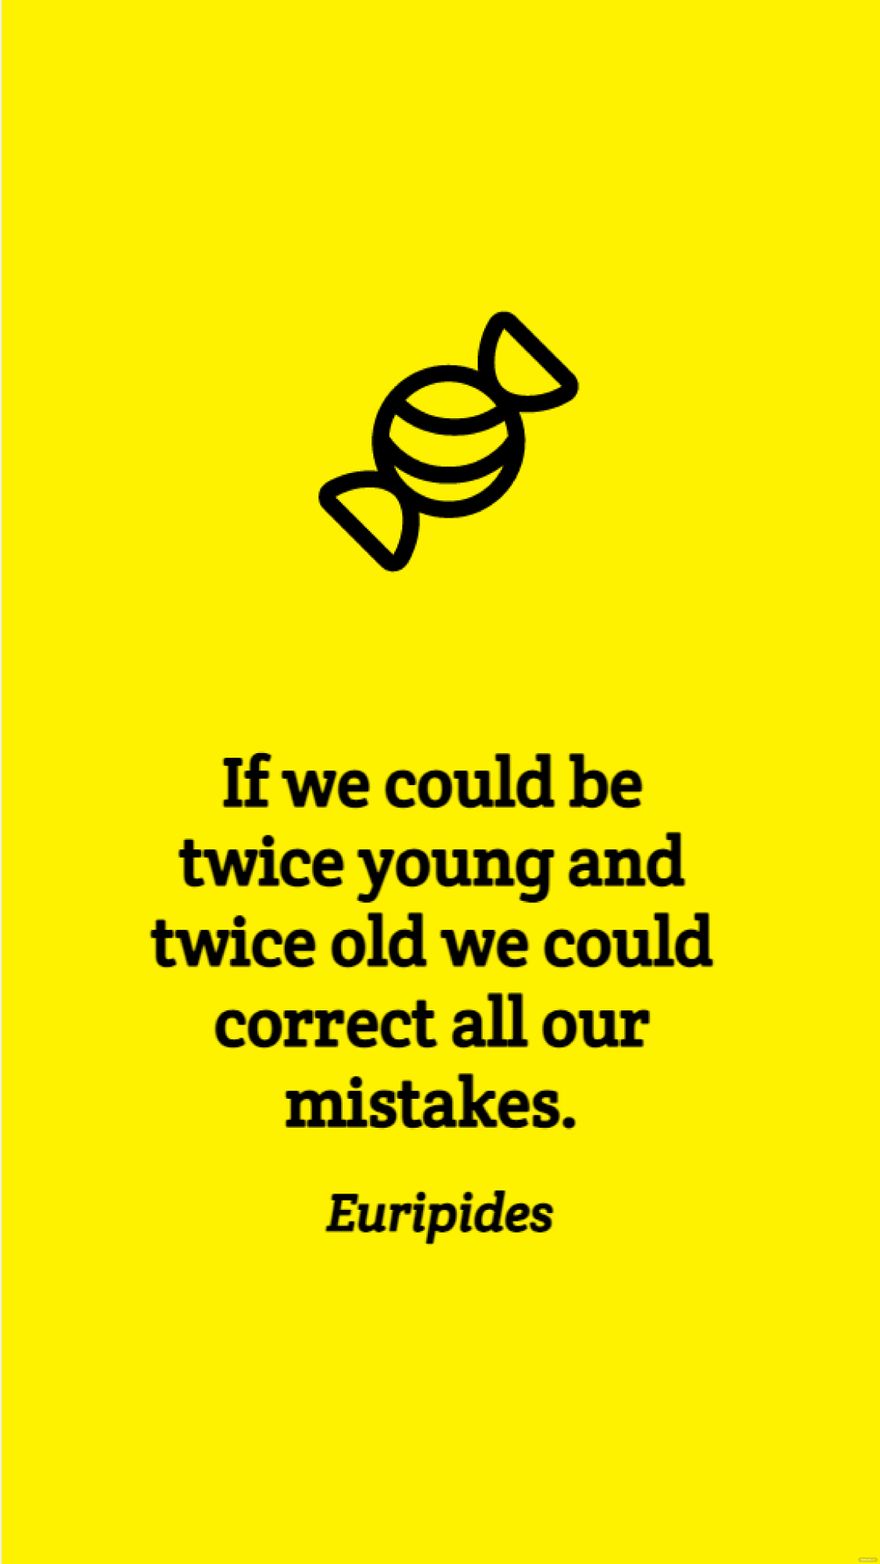 Euripides - If we could be twice young and twice old we could correct all our mistakes.